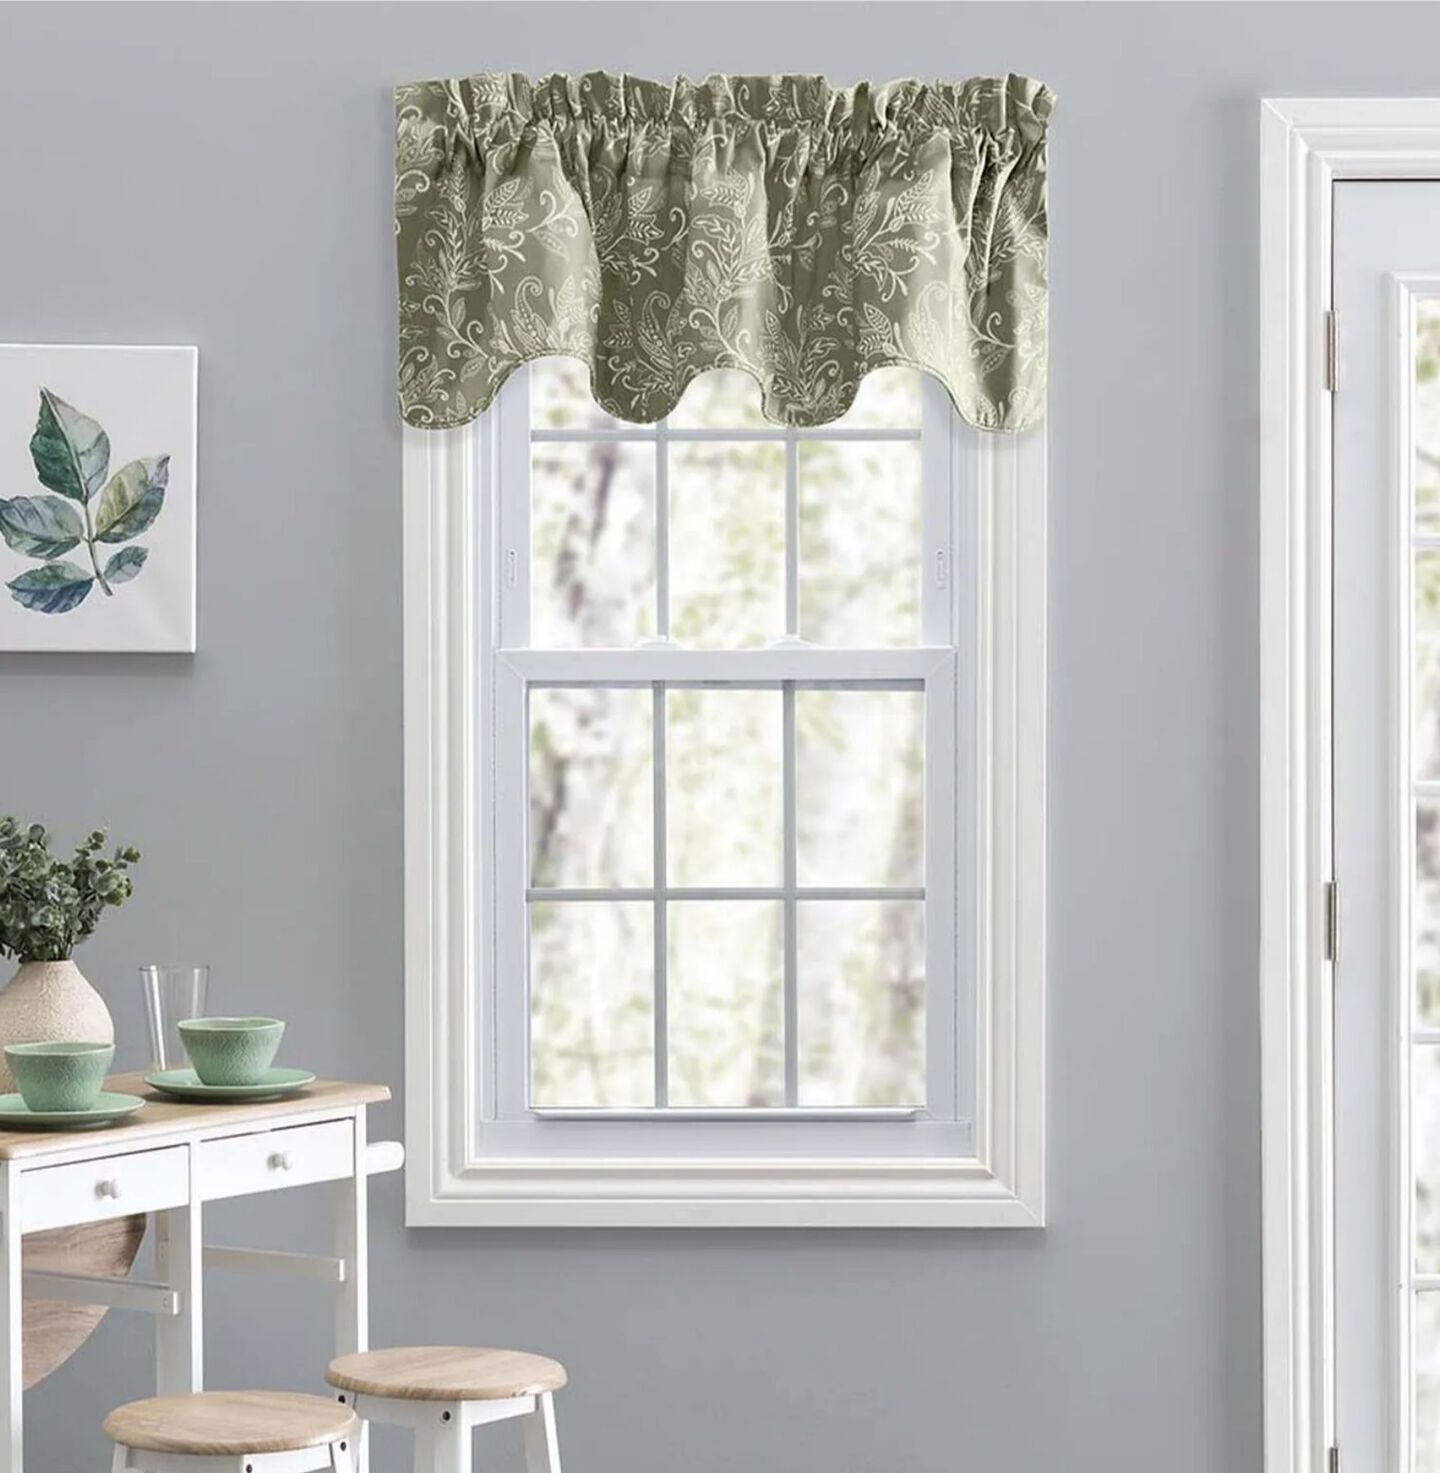 White paneled window with short green patterned curtains